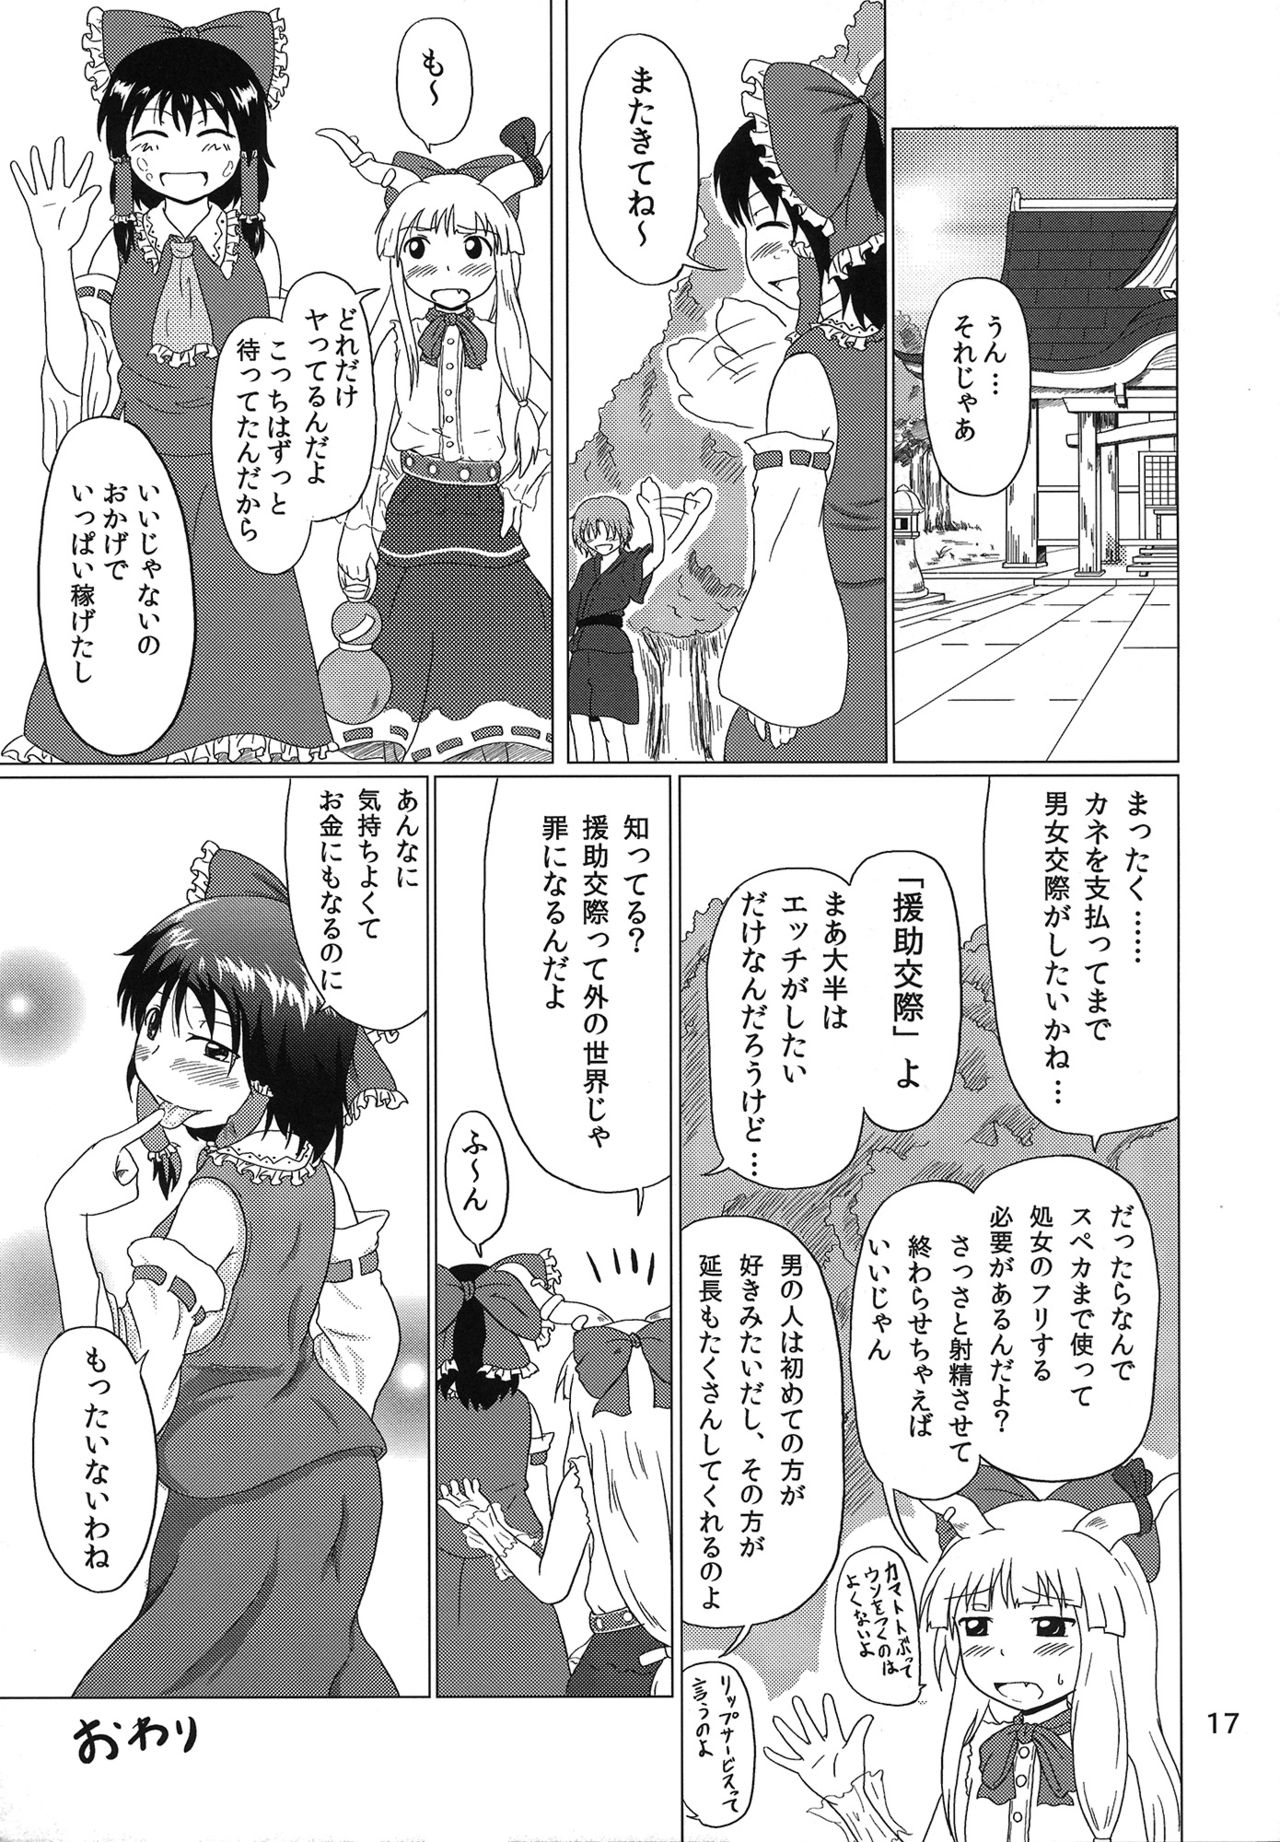 (C80) [Full High Kick (Mimofu)] Miko Bitch (Touhou Project) (C80) [ふるはいきっく (みもふ)] ミコビッチ (東方Project)